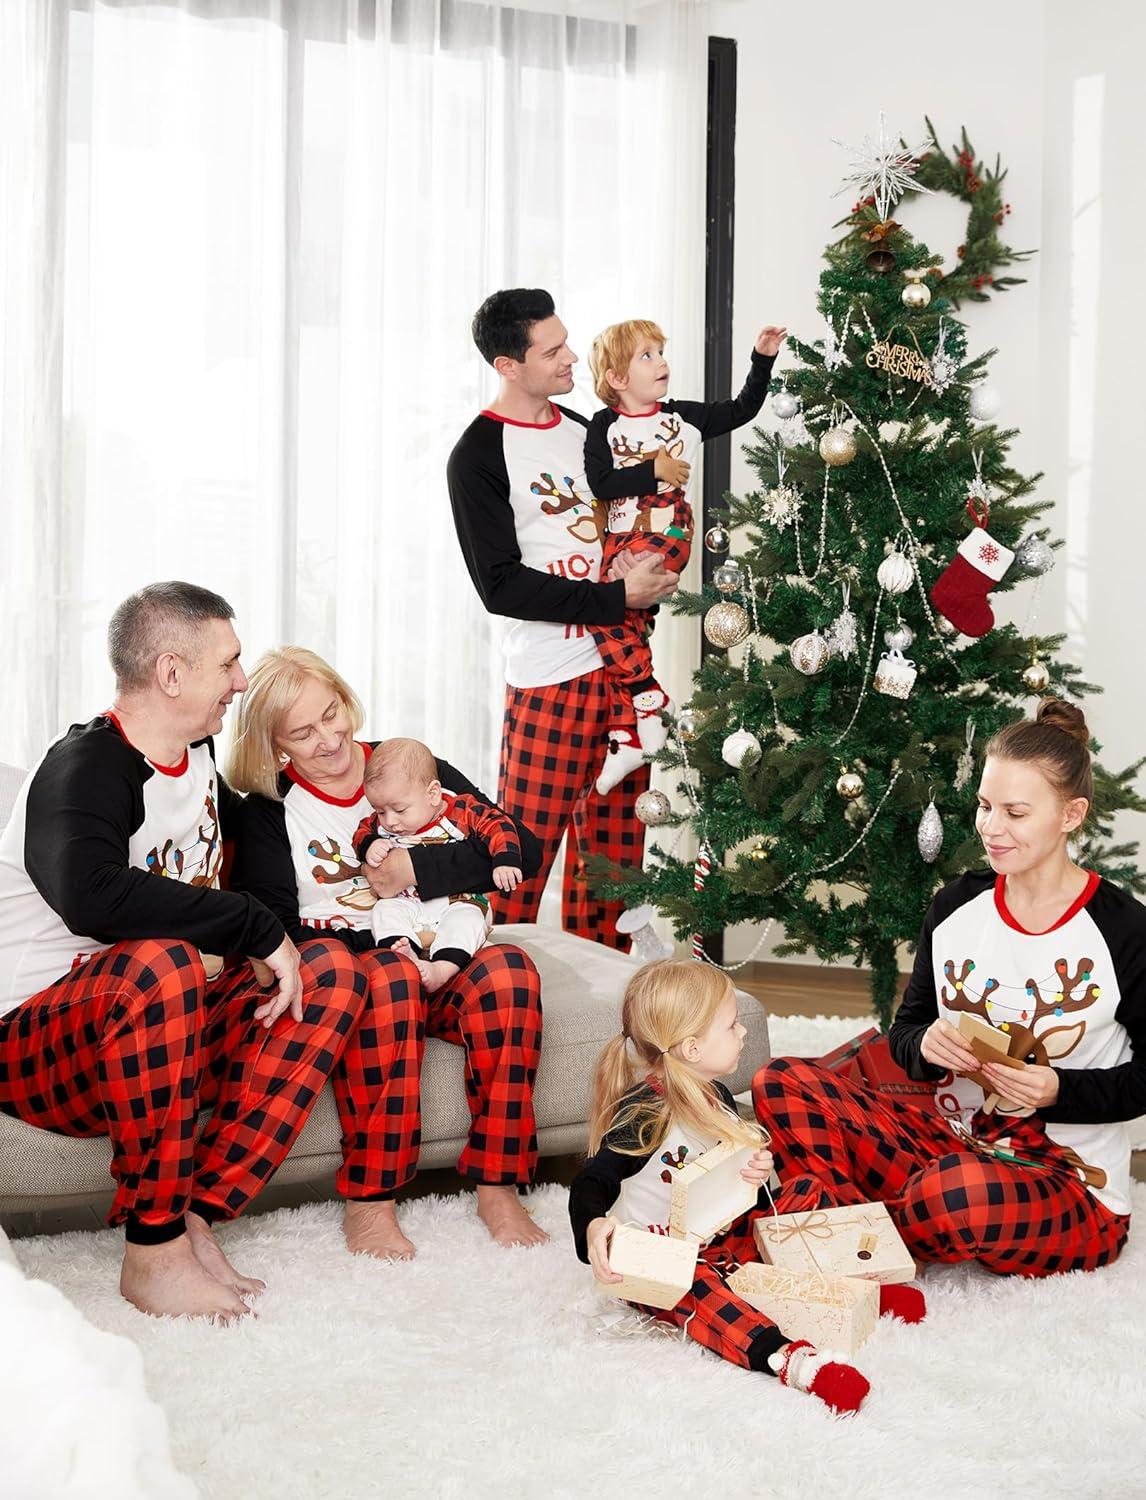 PATPAT Family Matching Christmas Pajamas Tree Snowflake and Letters Print  Sleepwear Long-sleeve Pajamas Sets Family Xmas Outfits Baby 6-9 Months Red